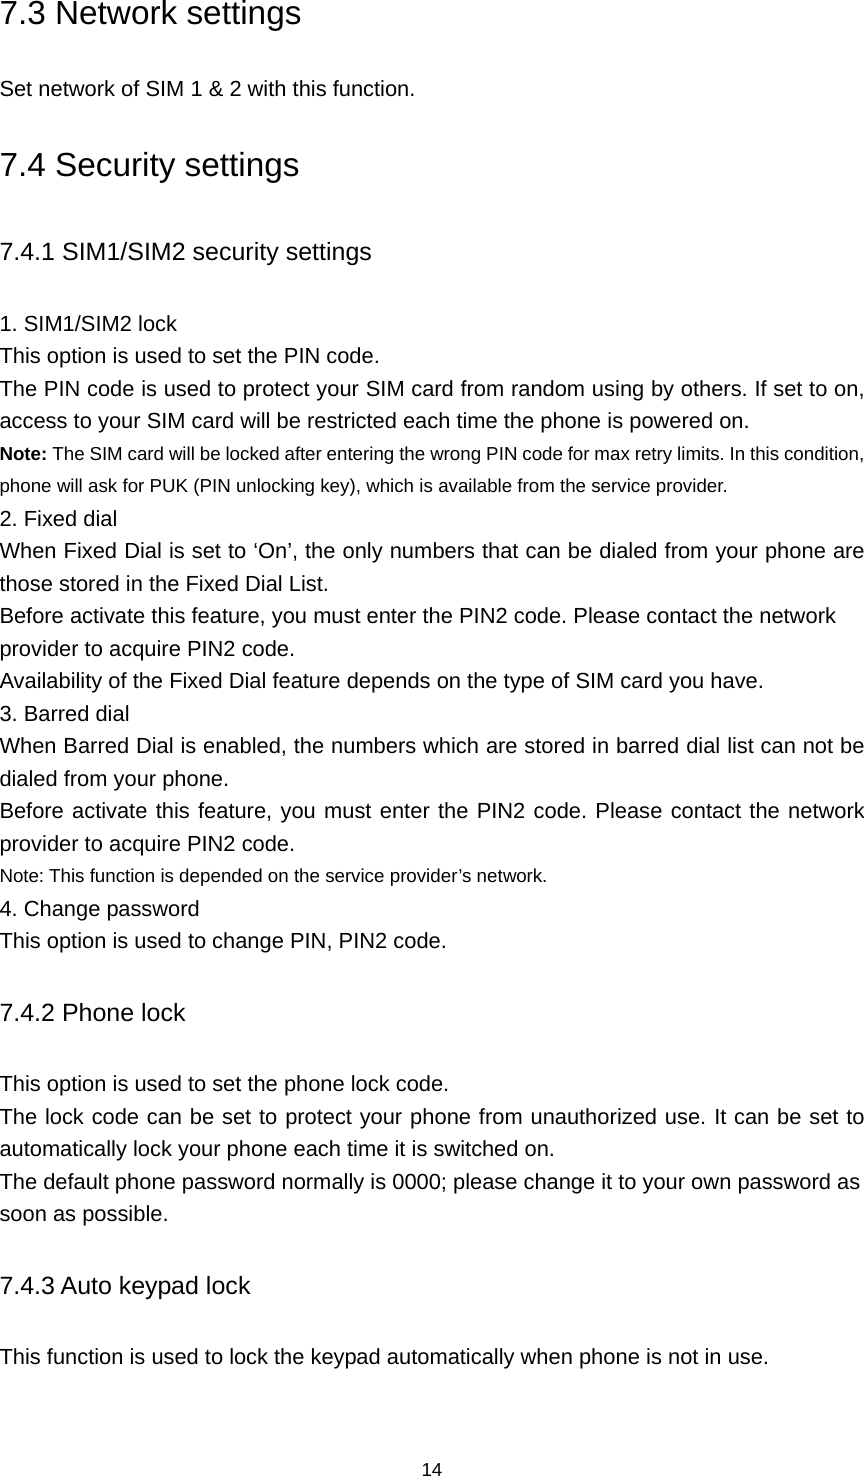 14 7.3 Network settings Set network of SIM 1 &amp; 2 with this function. 7.4 Security settings 7.4.1 SIM1/SIM2 security settings 1. SIM1/SIM2 lock This option is used to set the PIN code. The PIN code is used to protect your SIM card from random using by others. If set to on, access to your SIM card will be restricted each time the phone is powered on. Note: The SIM card will be locked after entering the wrong PIN code for max retry limits. In this condition, phone will ask for PUK (PIN unlocking key), which is available from the service provider. 2. Fixed dial When Fixed Dial is set to ‘On’, the only numbers that can be dialed from your phone are those stored in the Fixed Dial List. Before activate this feature, you must enter the PIN2 code. Please contact the network provider to acquire PIN2 code. Availability of the Fixed Dial feature depends on the type of SIM card you have. 3. Barred dial When Barred Dial is enabled, the numbers which are stored in barred dial list can not be dialed from your phone. Before activate this feature, you must enter the PIN2 code. Please contact the network provider to acquire PIN2 code. Note: This function is depended on the service provider’s network. 4. Change password This option is used to change PIN, PIN2 code. 7.4.2 Phone lock This option is used to set the phone lock code. The lock code can be set to protect your phone from unauthorized use. It can be set to automatically lock your phone each time it is switched on. The default phone password normally is 0000; please change it to your own password as soon as possible. 7.4.3 Auto keypad lock This function is used to lock the keypad automatically when phone is not in use.   